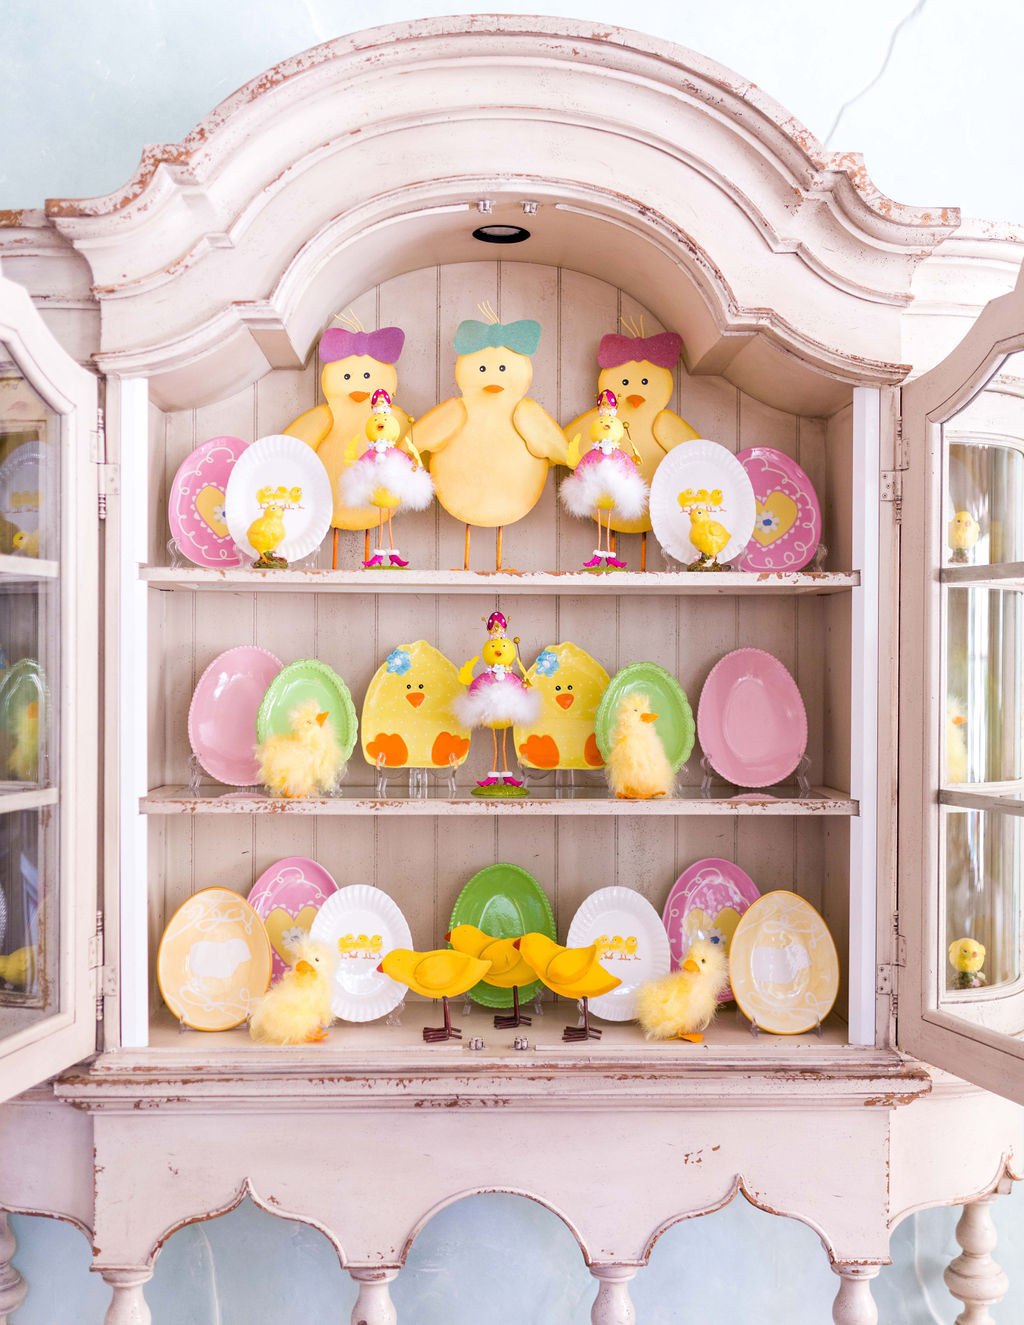 Home Decor Blog Turtle Creek Lane shows how to decorate for Easter at turtlecreeklane.com